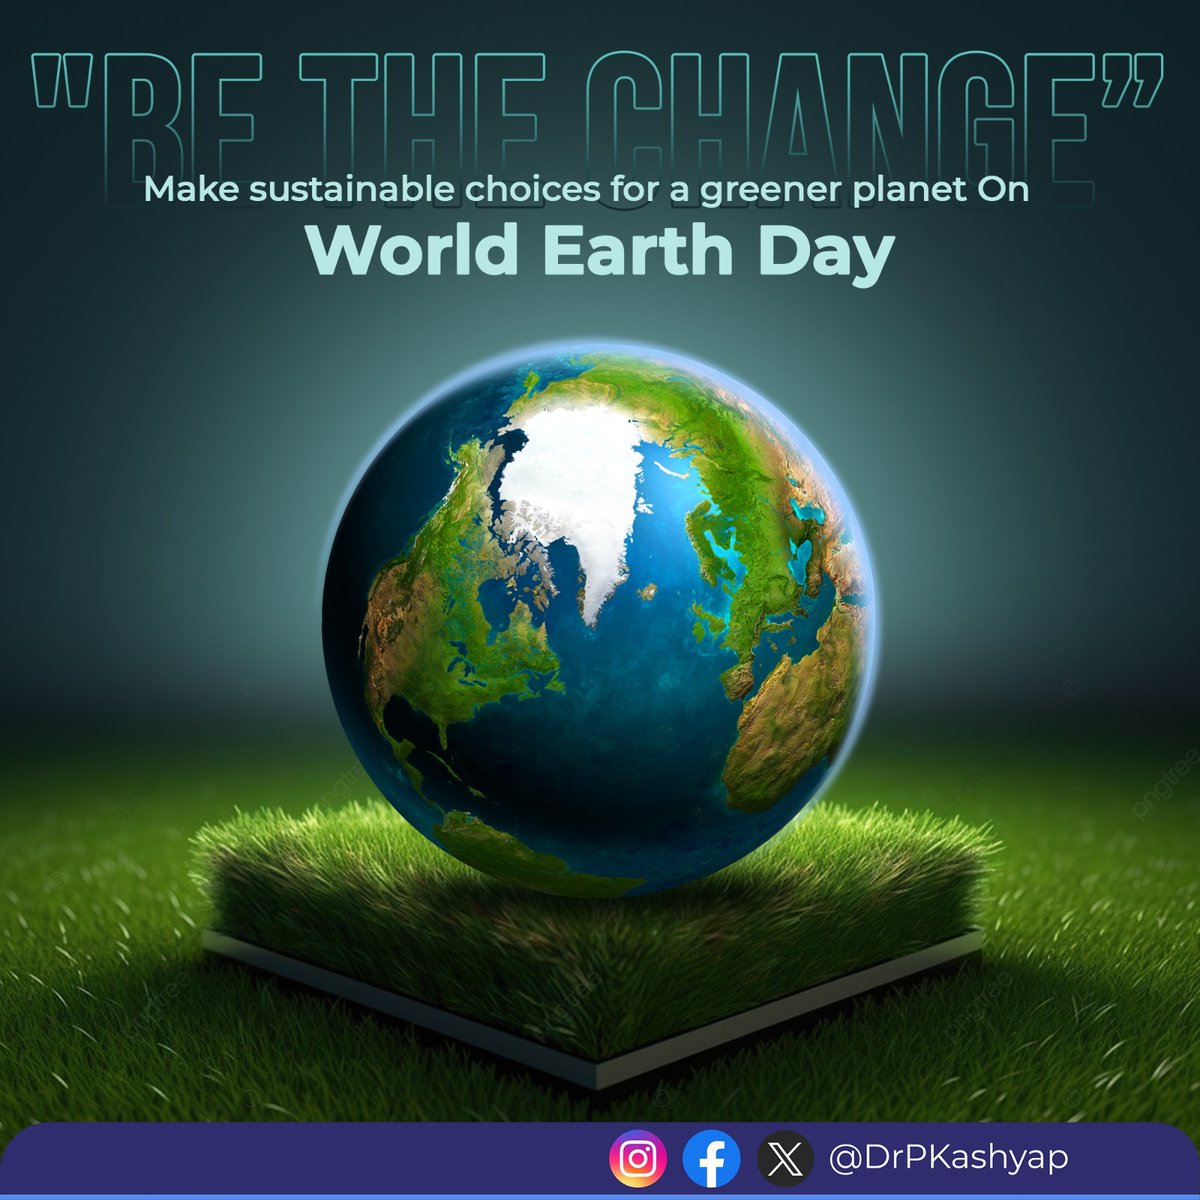 On this #EarthDay, we renew & reinforce our commitment to preserving our planet for future generations.

Together, we can make a difference by reducing our carbon footprint, protecting biodiversity, and working towards environmental sustainability. Let's act today for a better